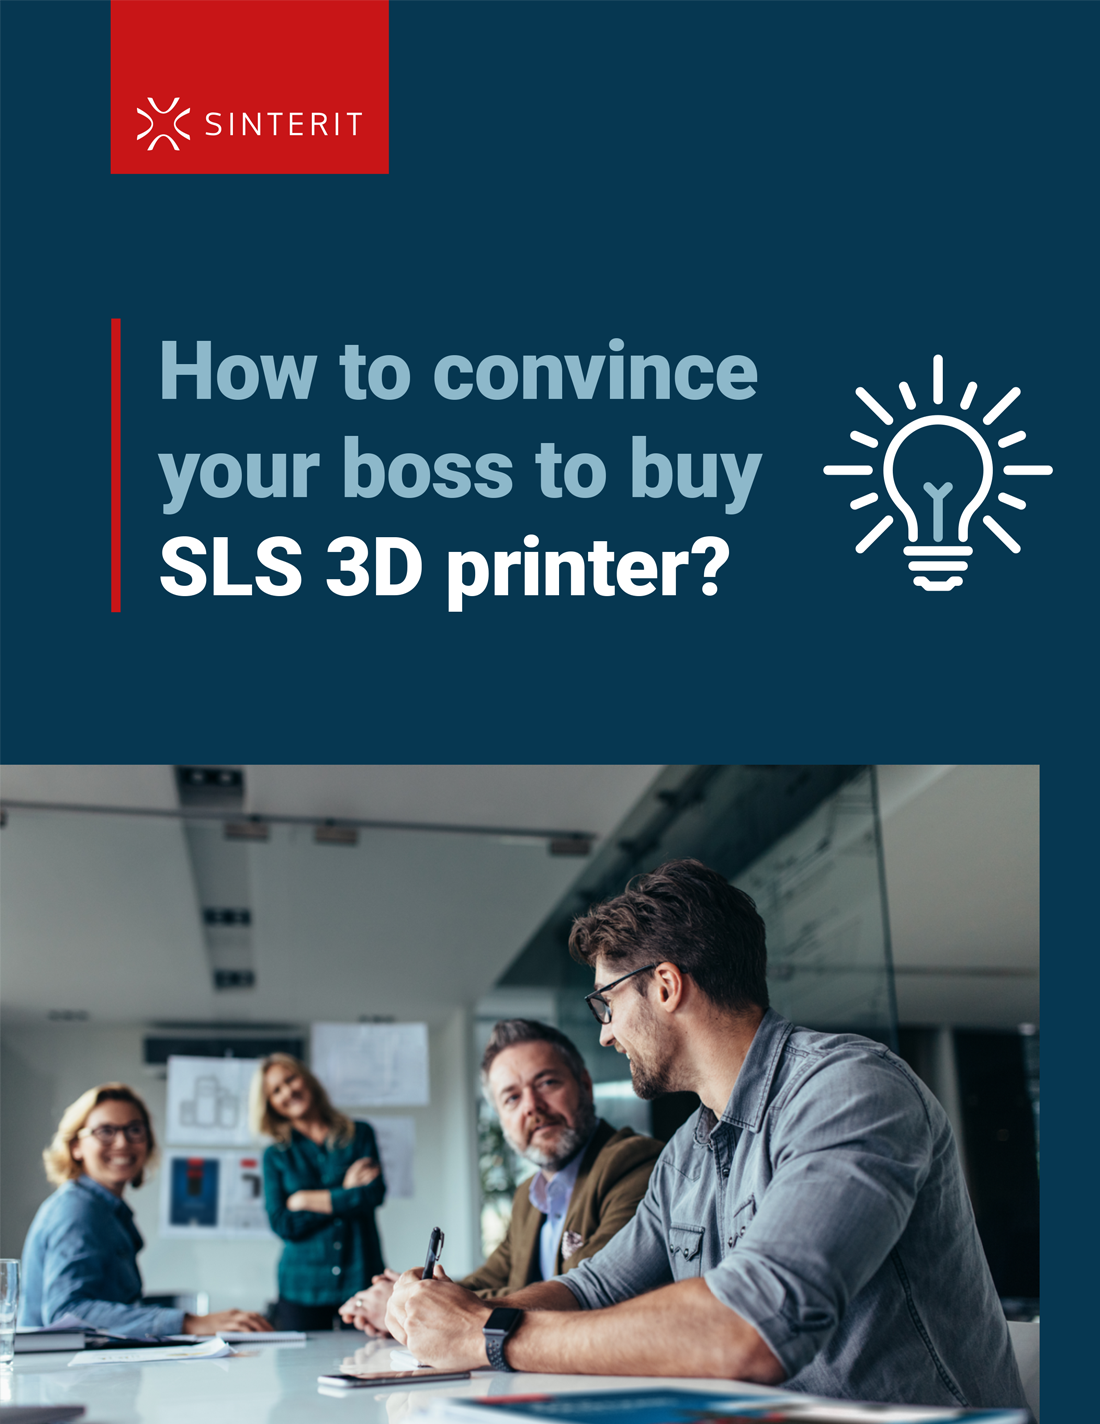 Whitepaper: How to convince your boss to buy an SLS 3D printer?